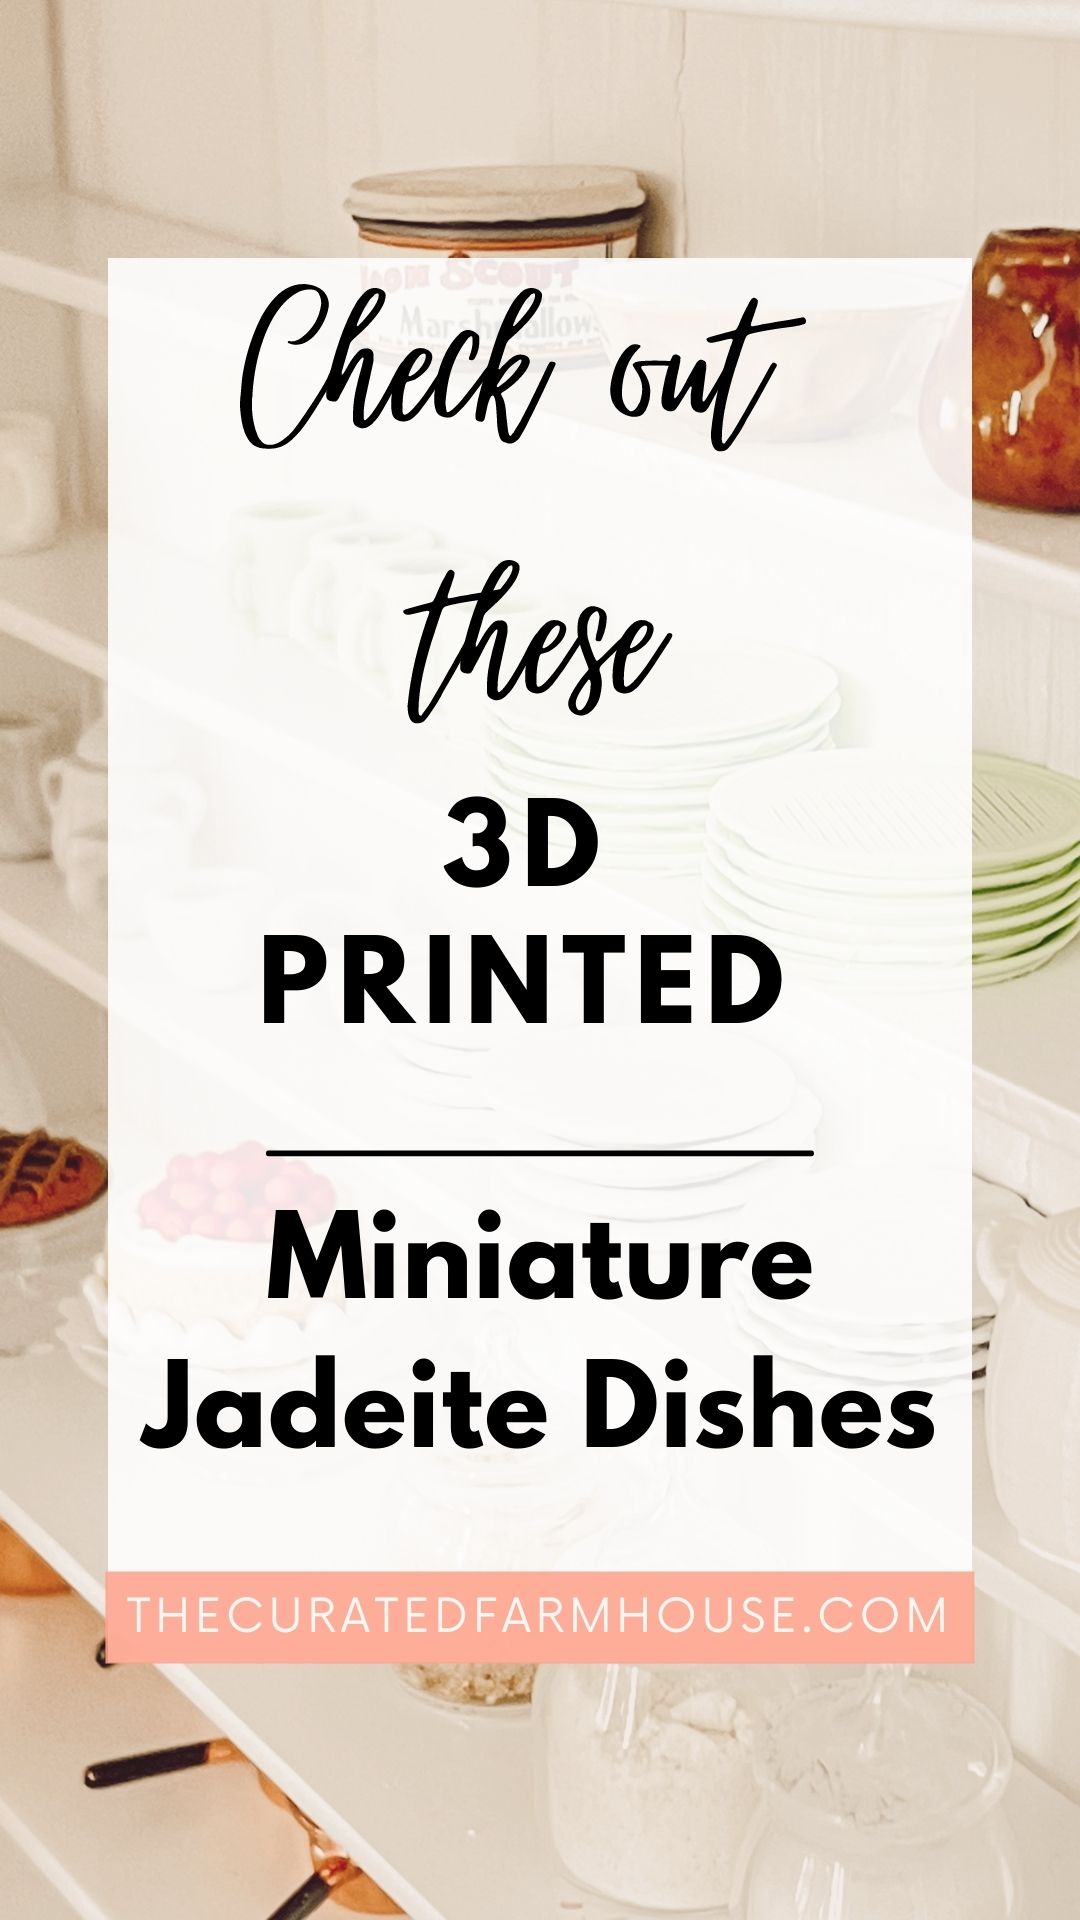 Check Out These 3D Printed Miniature Jadeite Dishes